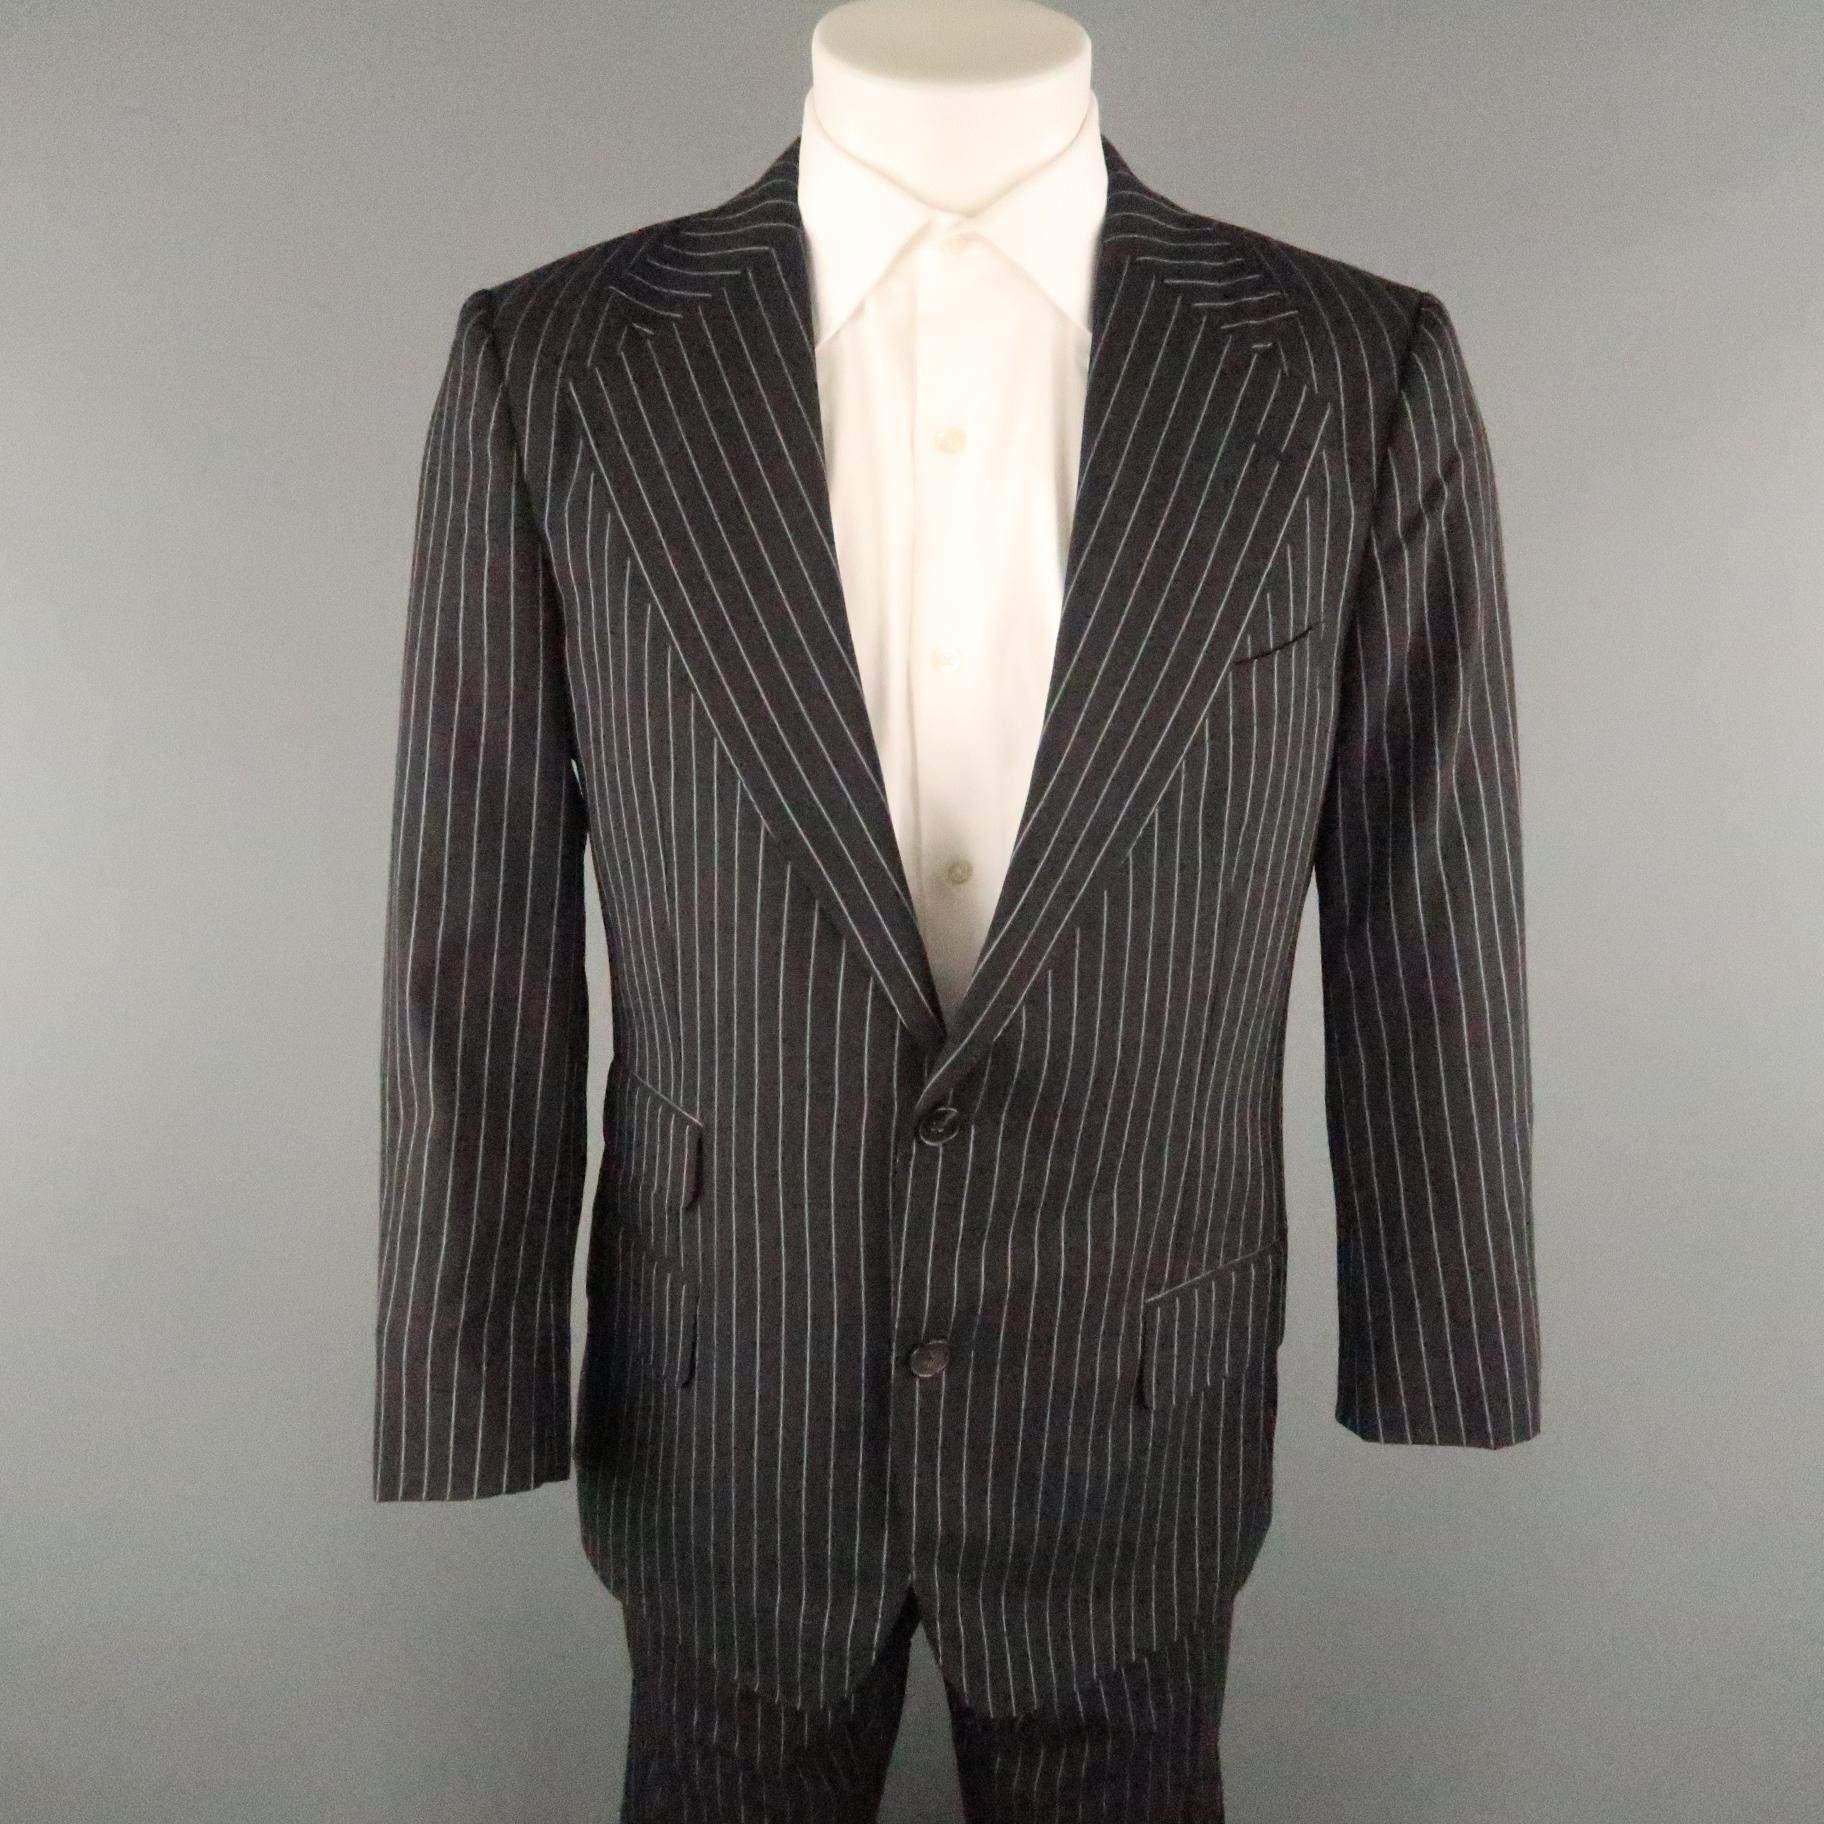 GUCCI suit comes in a black and white pinstripe wool featuring a notch lapel, single breasted, flap pockets, two button closure, and a matching flat front style pant.
 
Excellent Pre-Owned Condition.
Marked: 52
 
Measurements:
 
-Jacket
Shoulder: 18